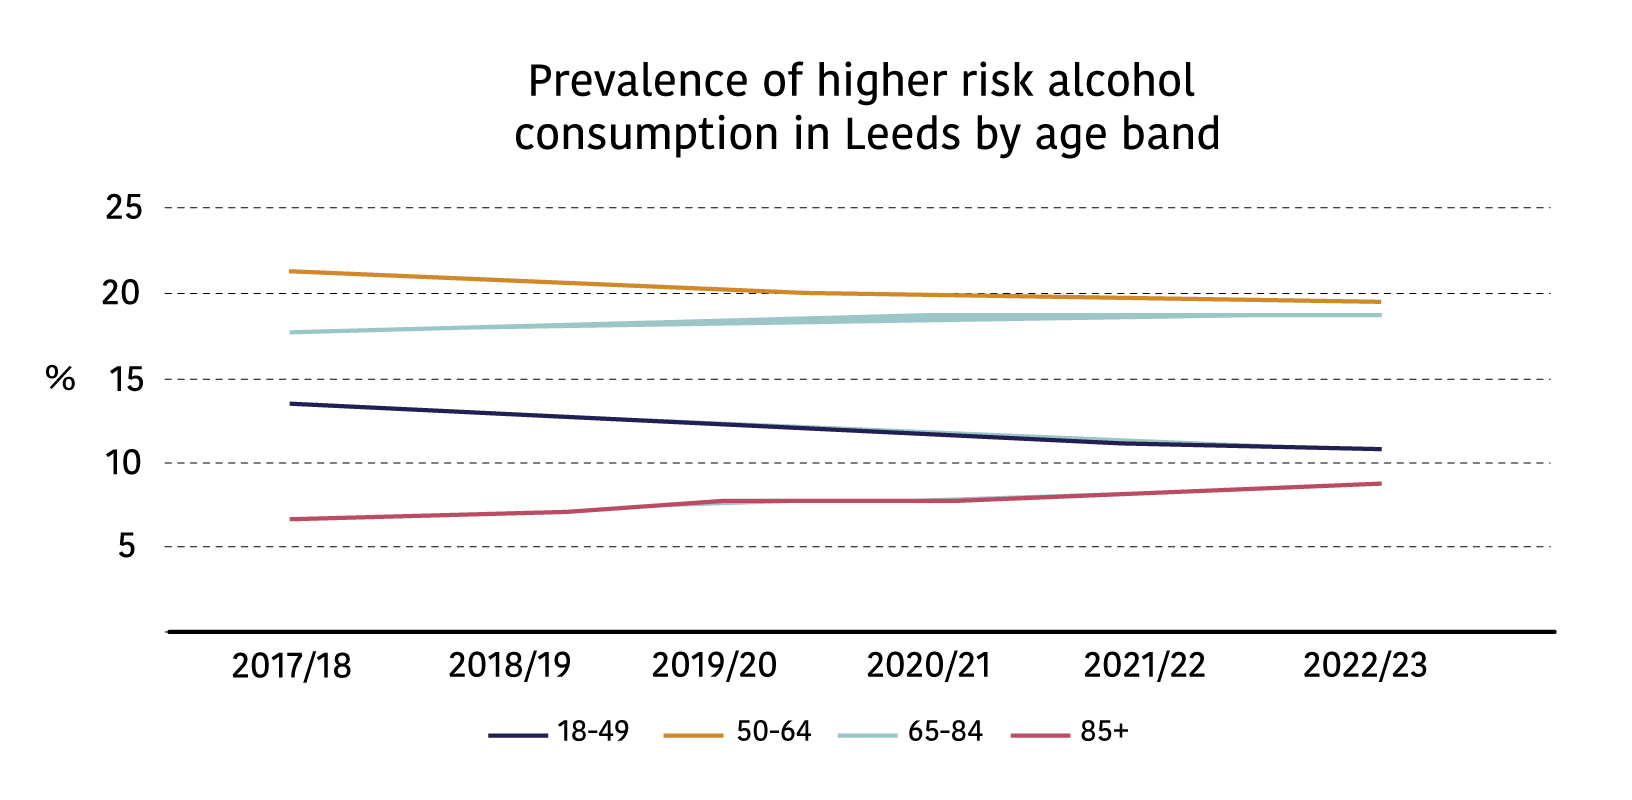 The graph shows the prevalence of higher risk alcohol consumption in Leeds by age band from 2017/8 to 2022/3. The graph shows people aged 85+ to have the lowest percentage prevalence of higher risk alcohol consumption, followed by people aged 18-49, then people aged 65-84. 50-64 year olds have the highest percentage prevalence of higher risk alcohol consumption. The graph shows that the percentage prevalence of higher risk alcohol consumption in Leeds for those aged 65-84 and 85+ has increased between 2017/8 to 2022/3 whilst in other groups it has decreased.